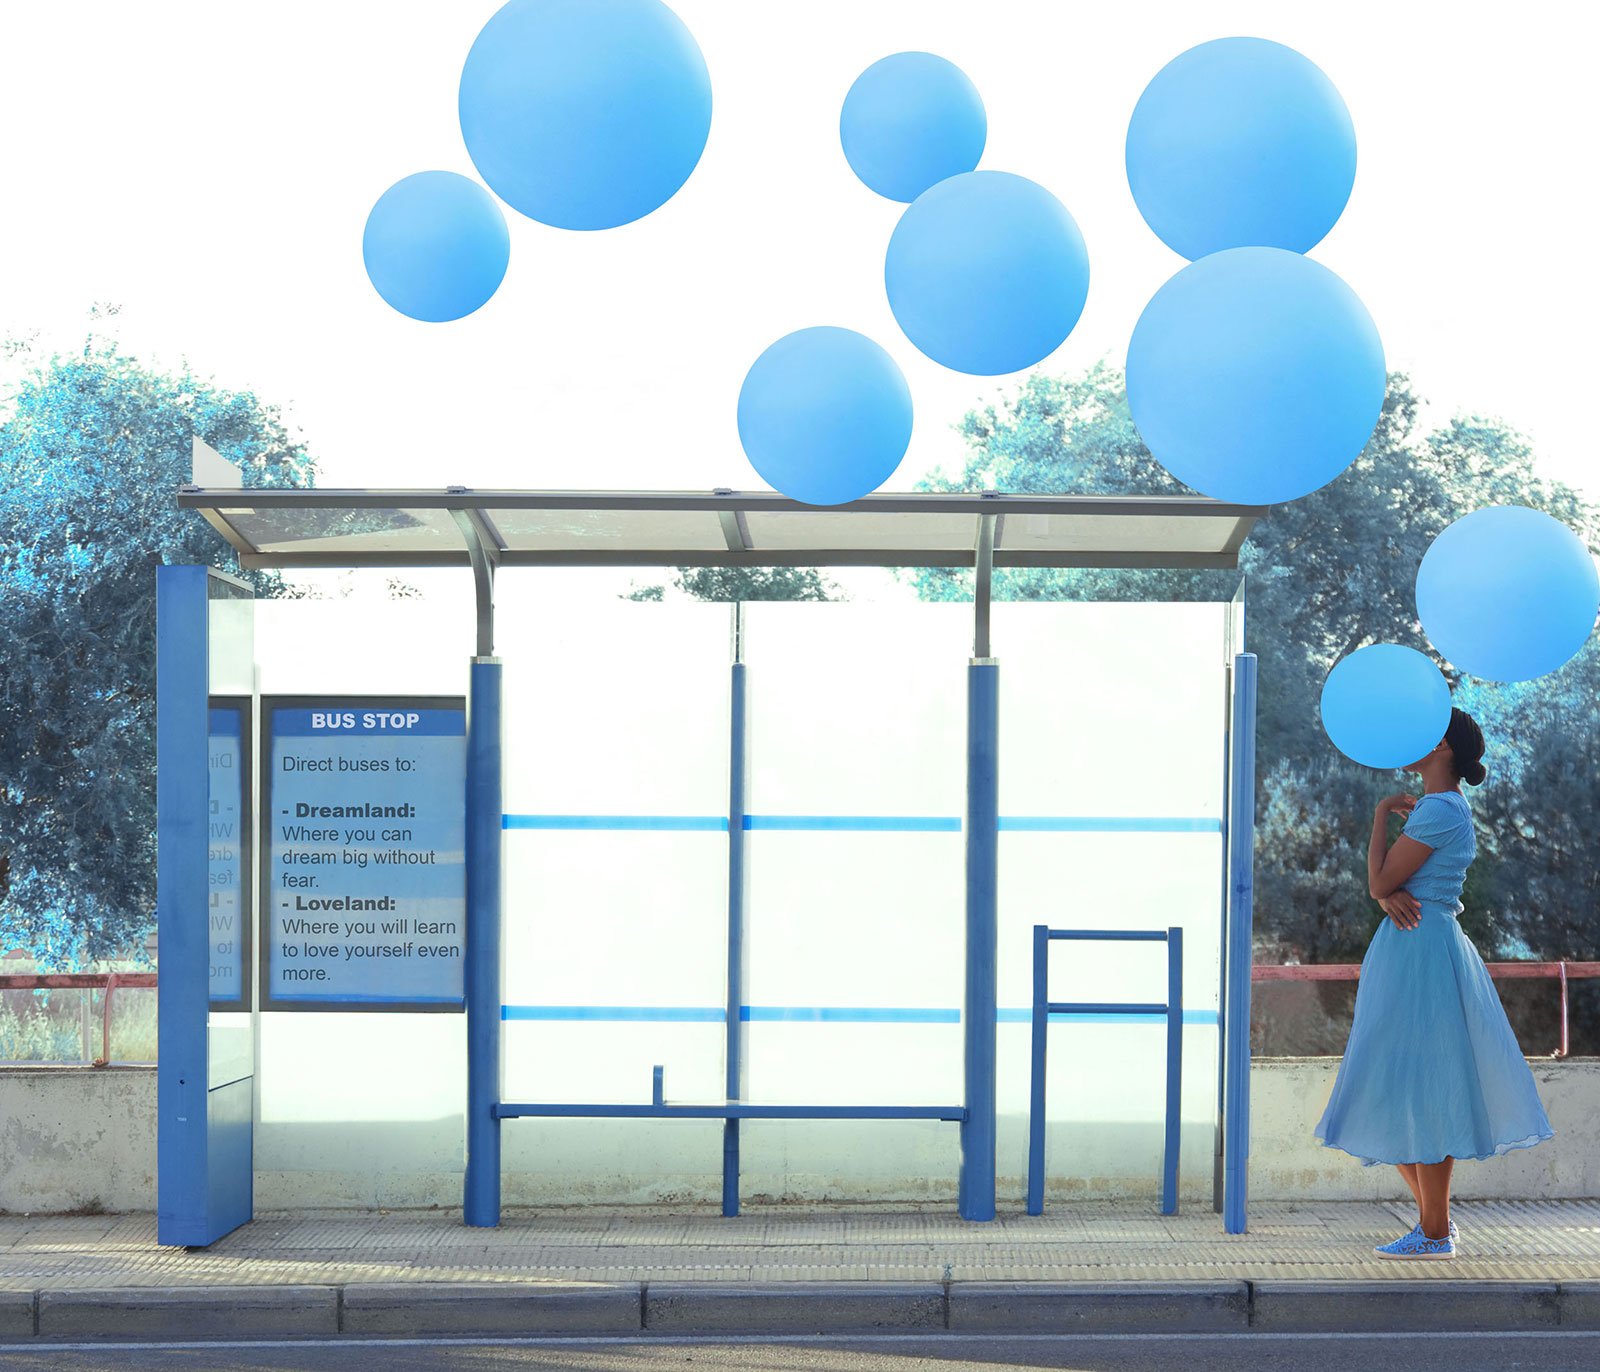 Woman at bus stop with shiny blue balloons flying overhead